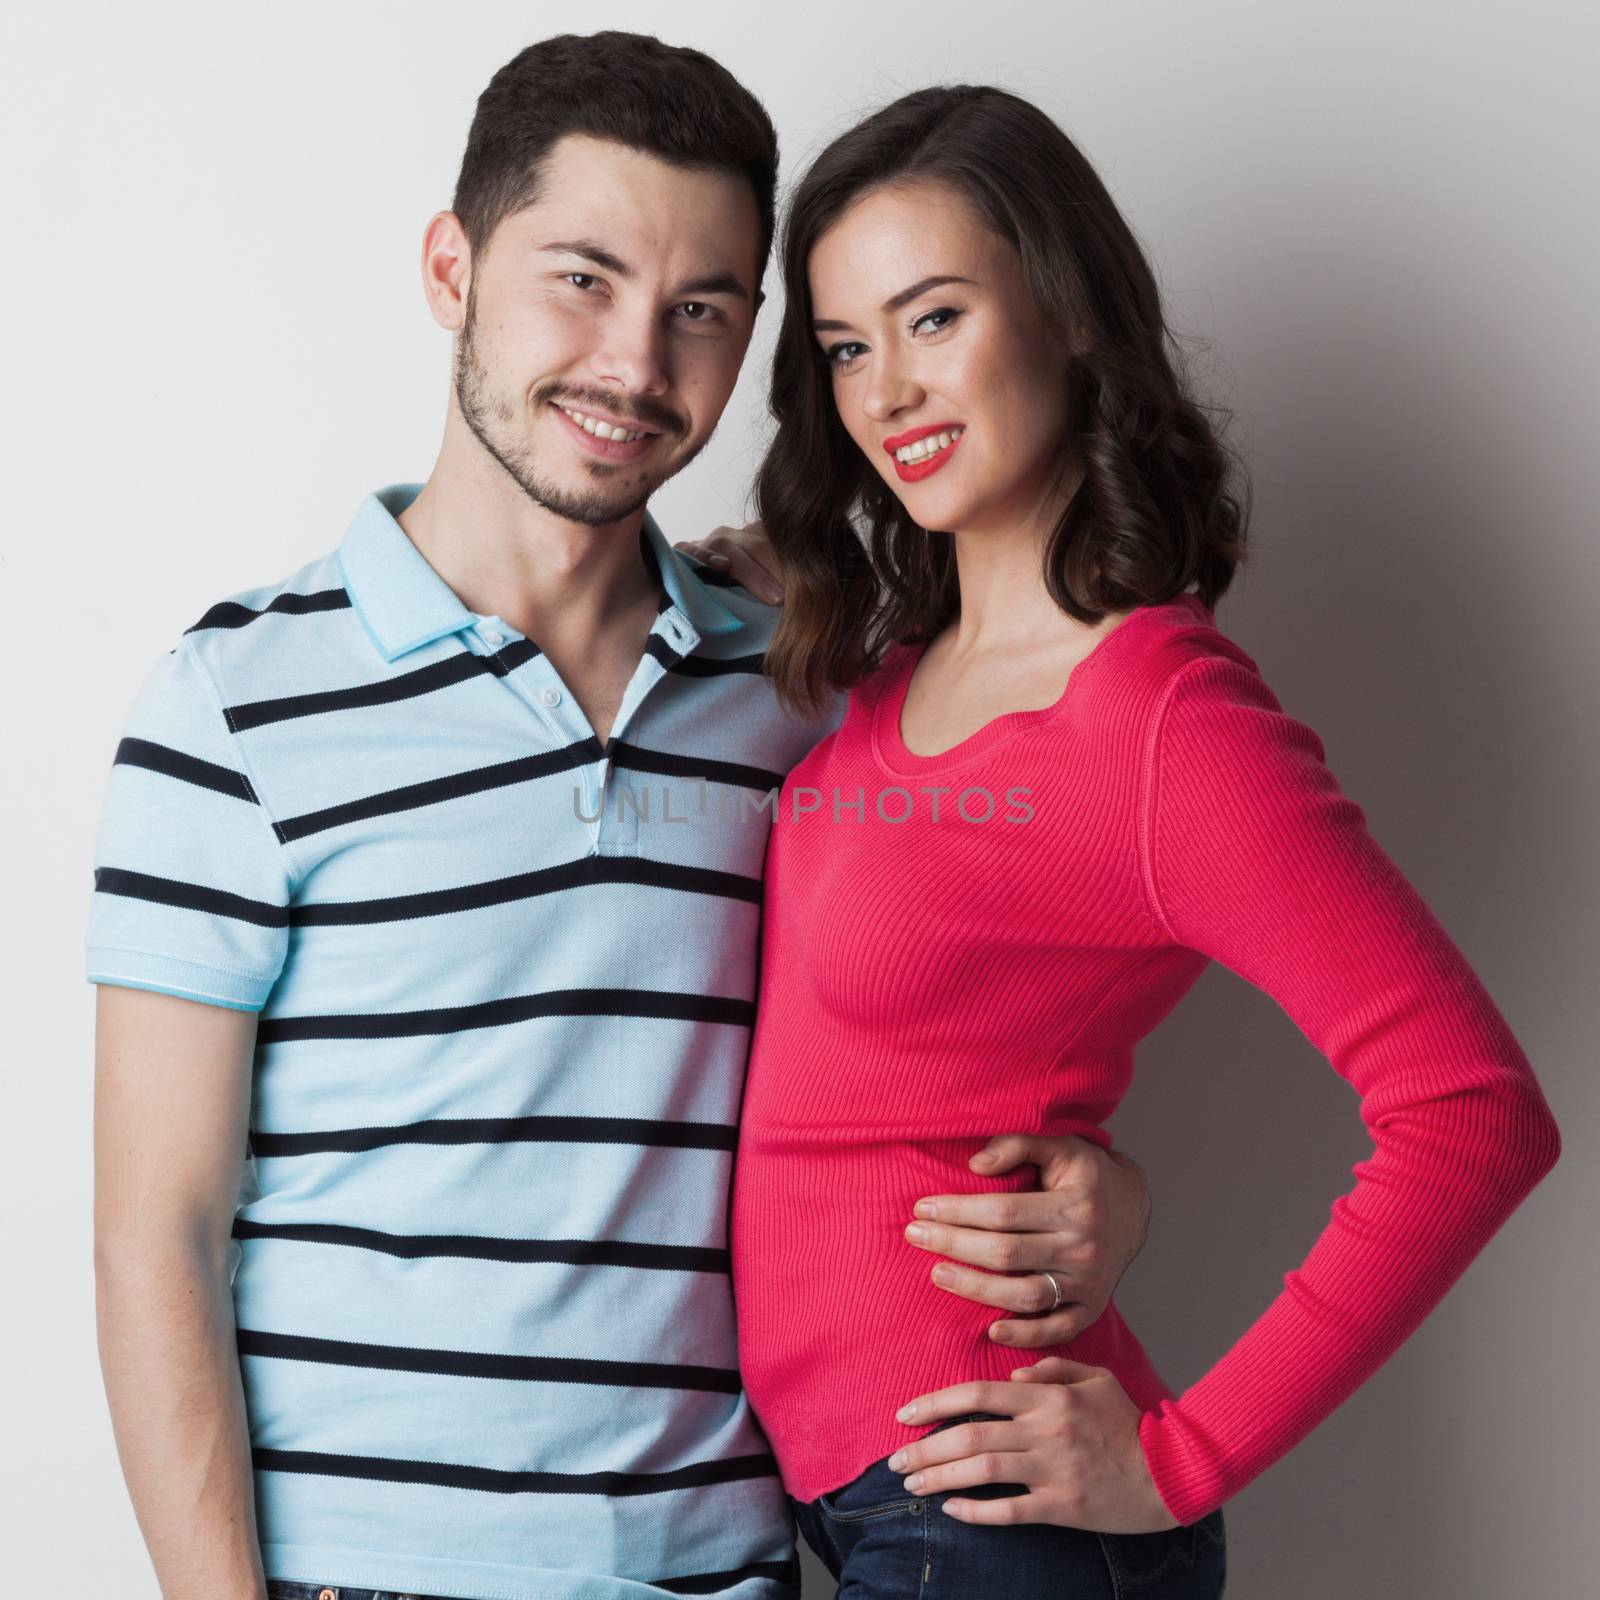 Young smiling couple standing on white background, studio shot